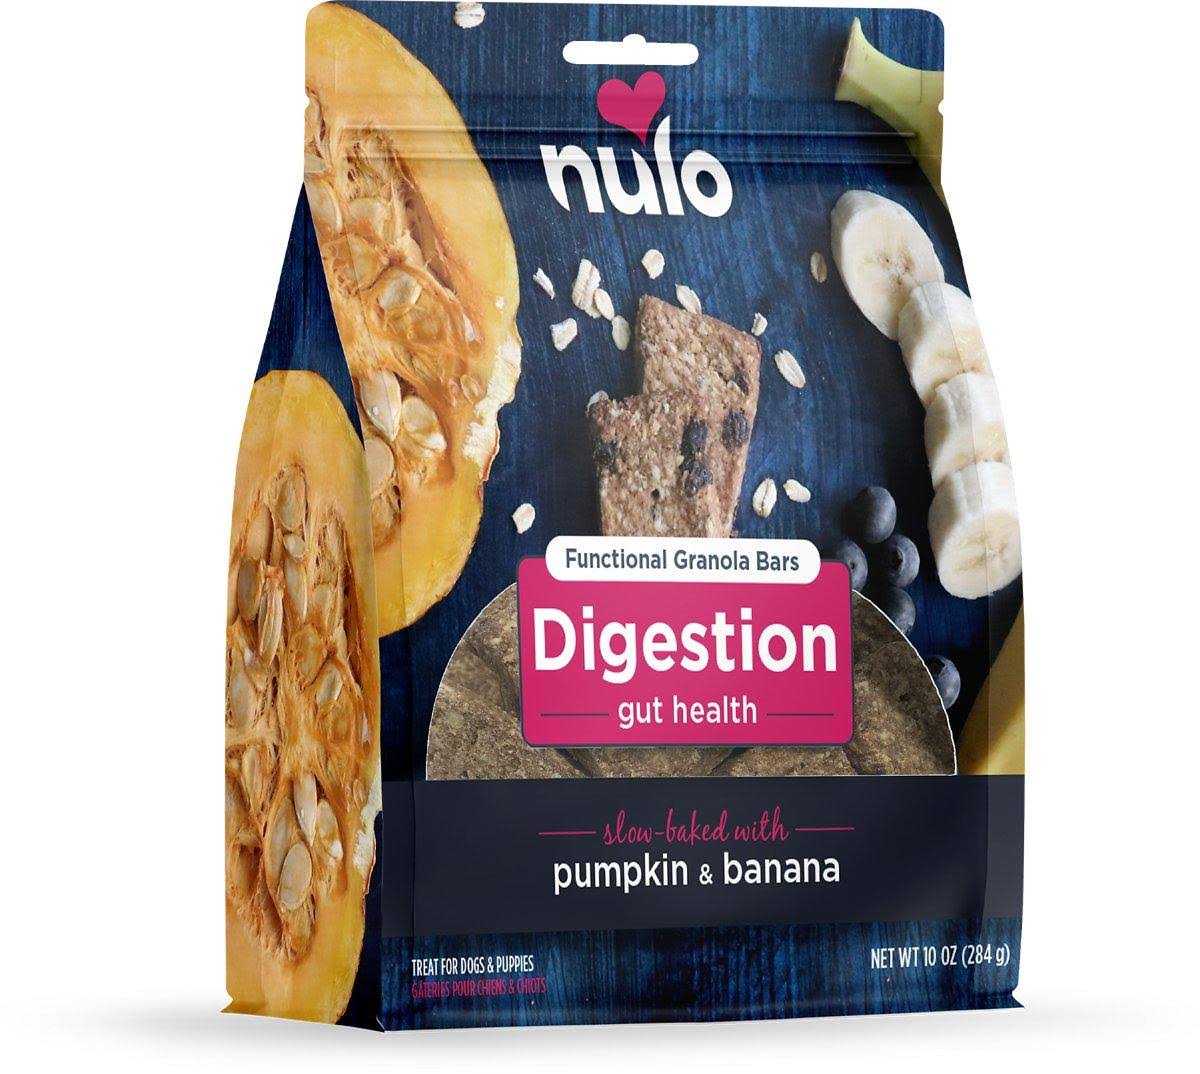 Nulo Digestion Functional Granola Bars For Dogs 10 oz